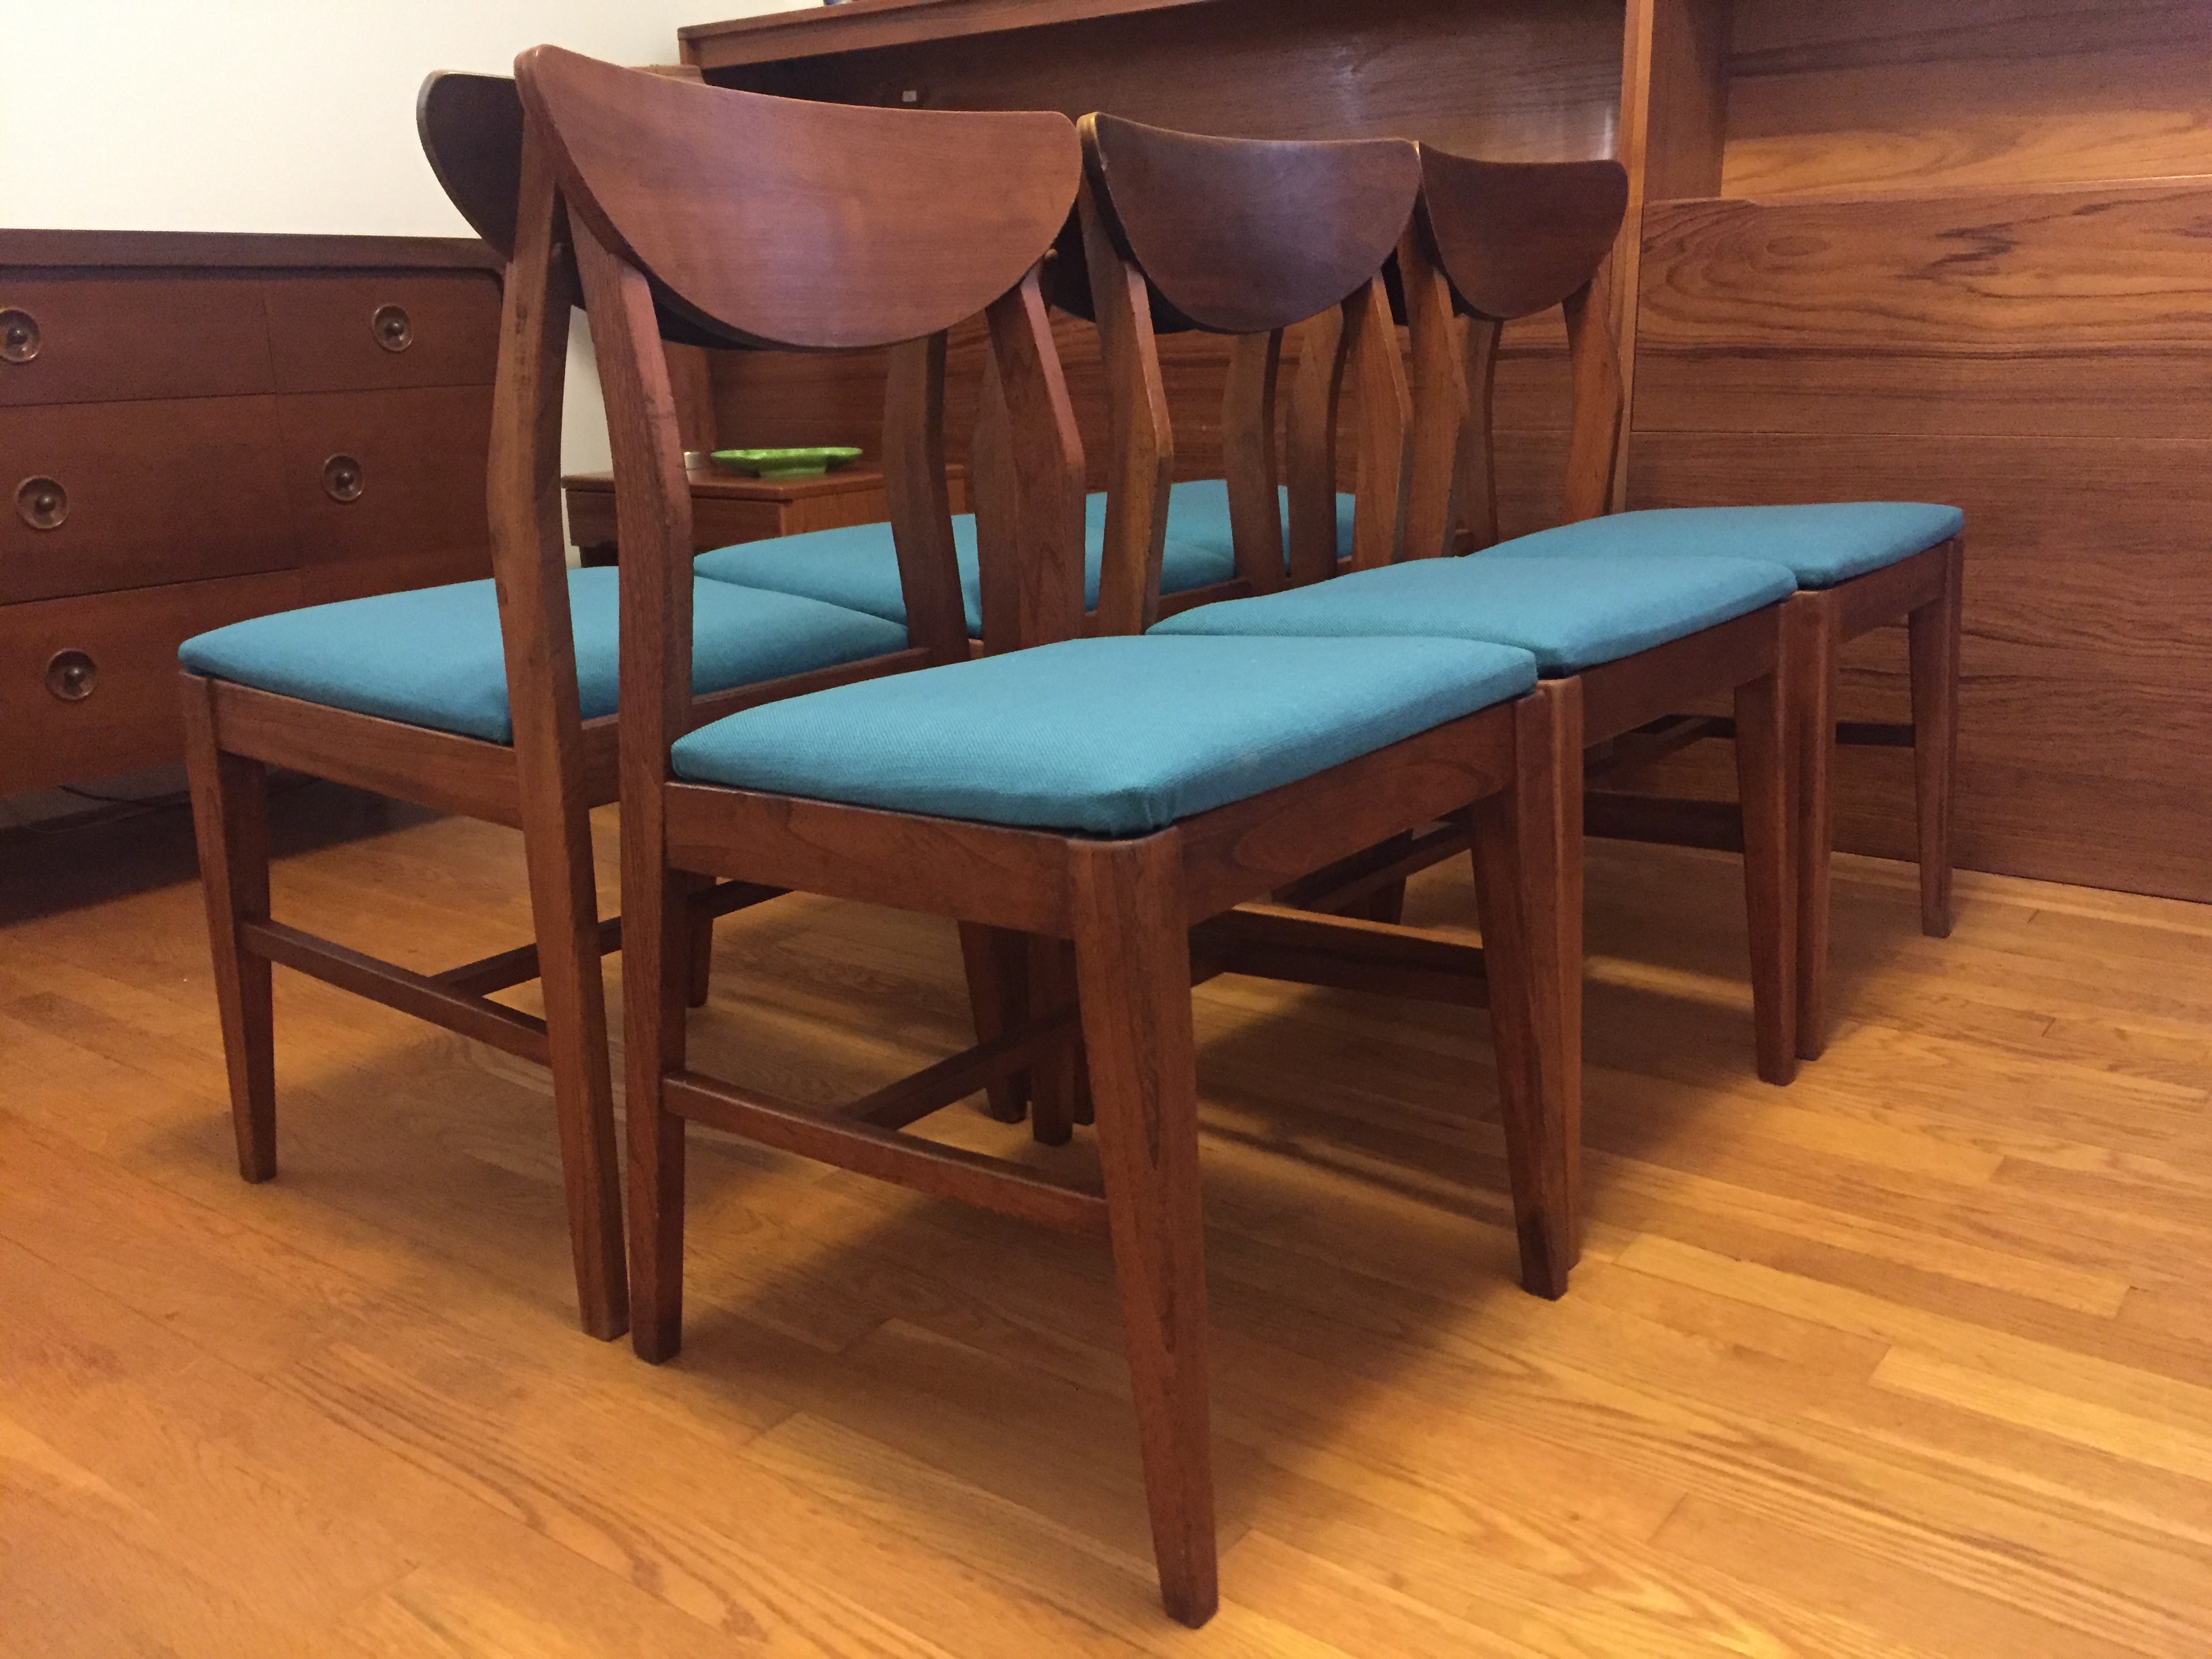 bassets mid century dining room table and chairs